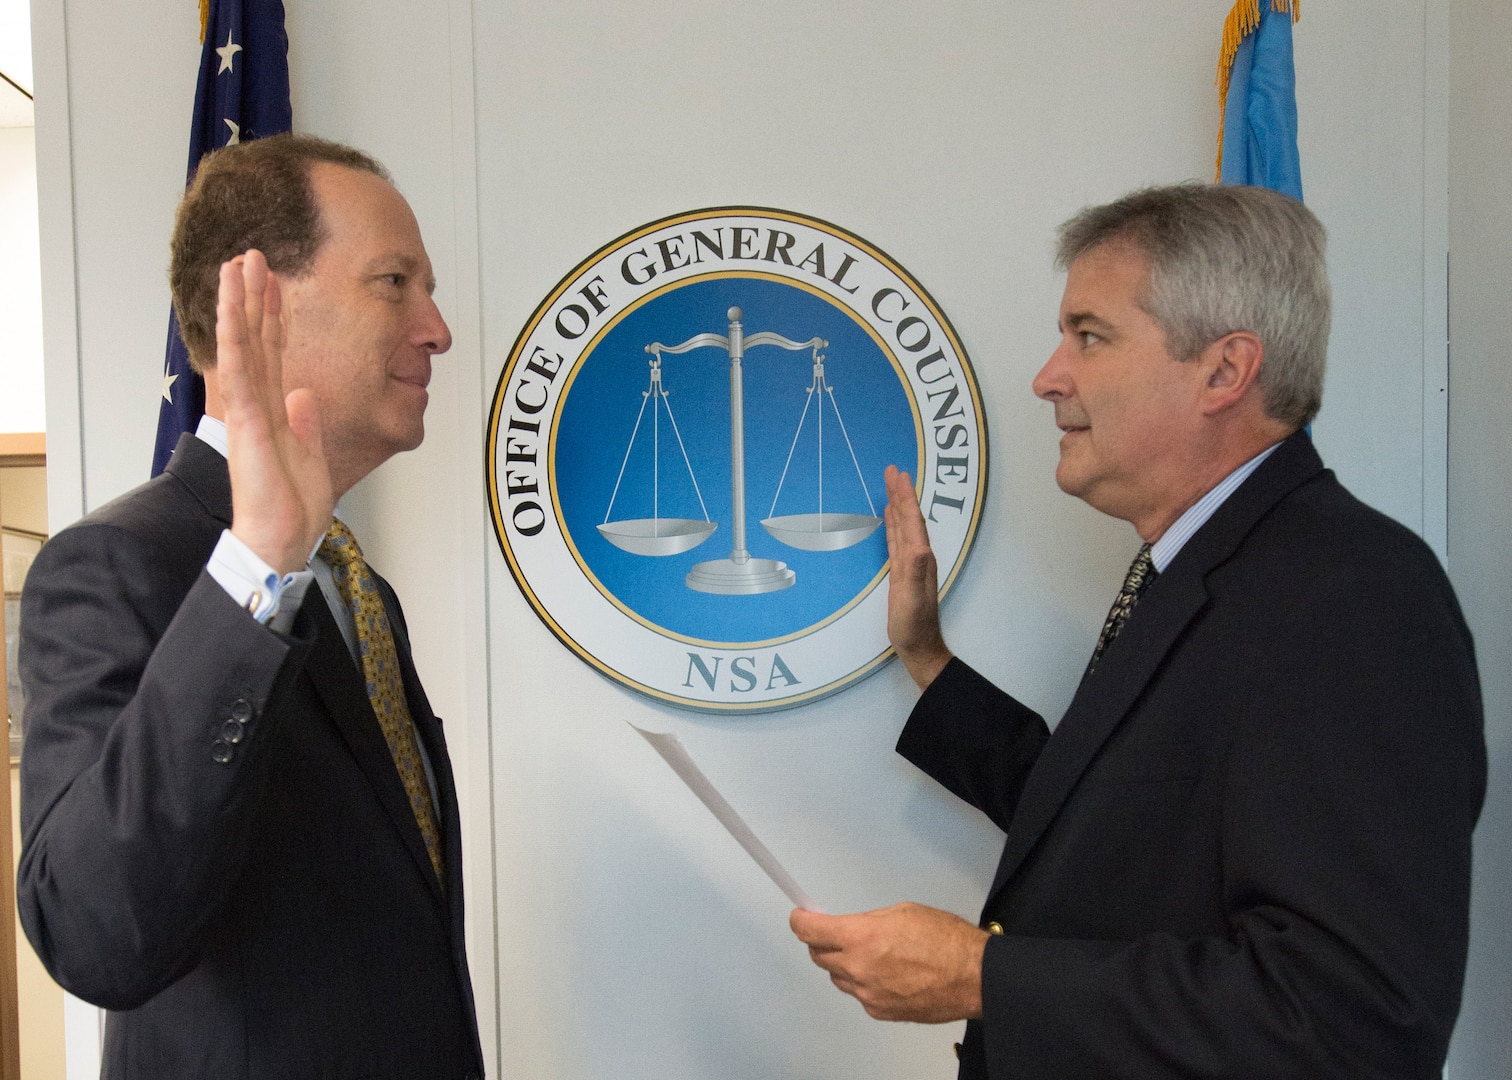 NSA General Counsel Glenn Gerstell receives the oath from Glenn Leuschner Associate Director for Corporate Leadership (l. to r.).